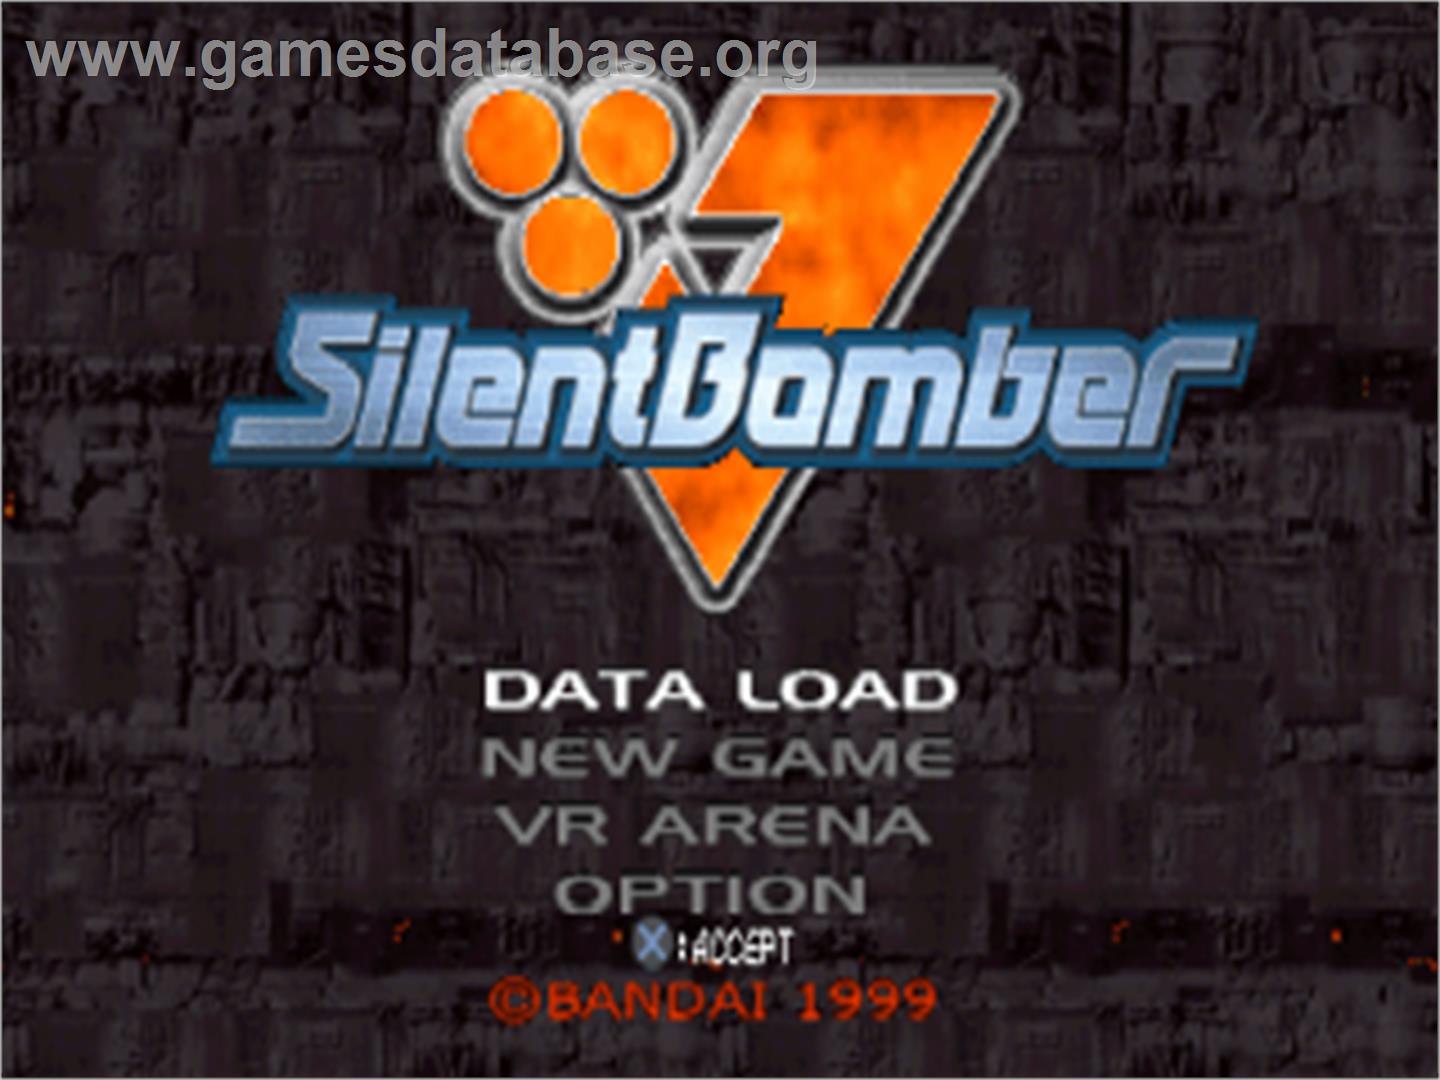 Silent Bomber - Sony Playstation - Artwork - Title Screen